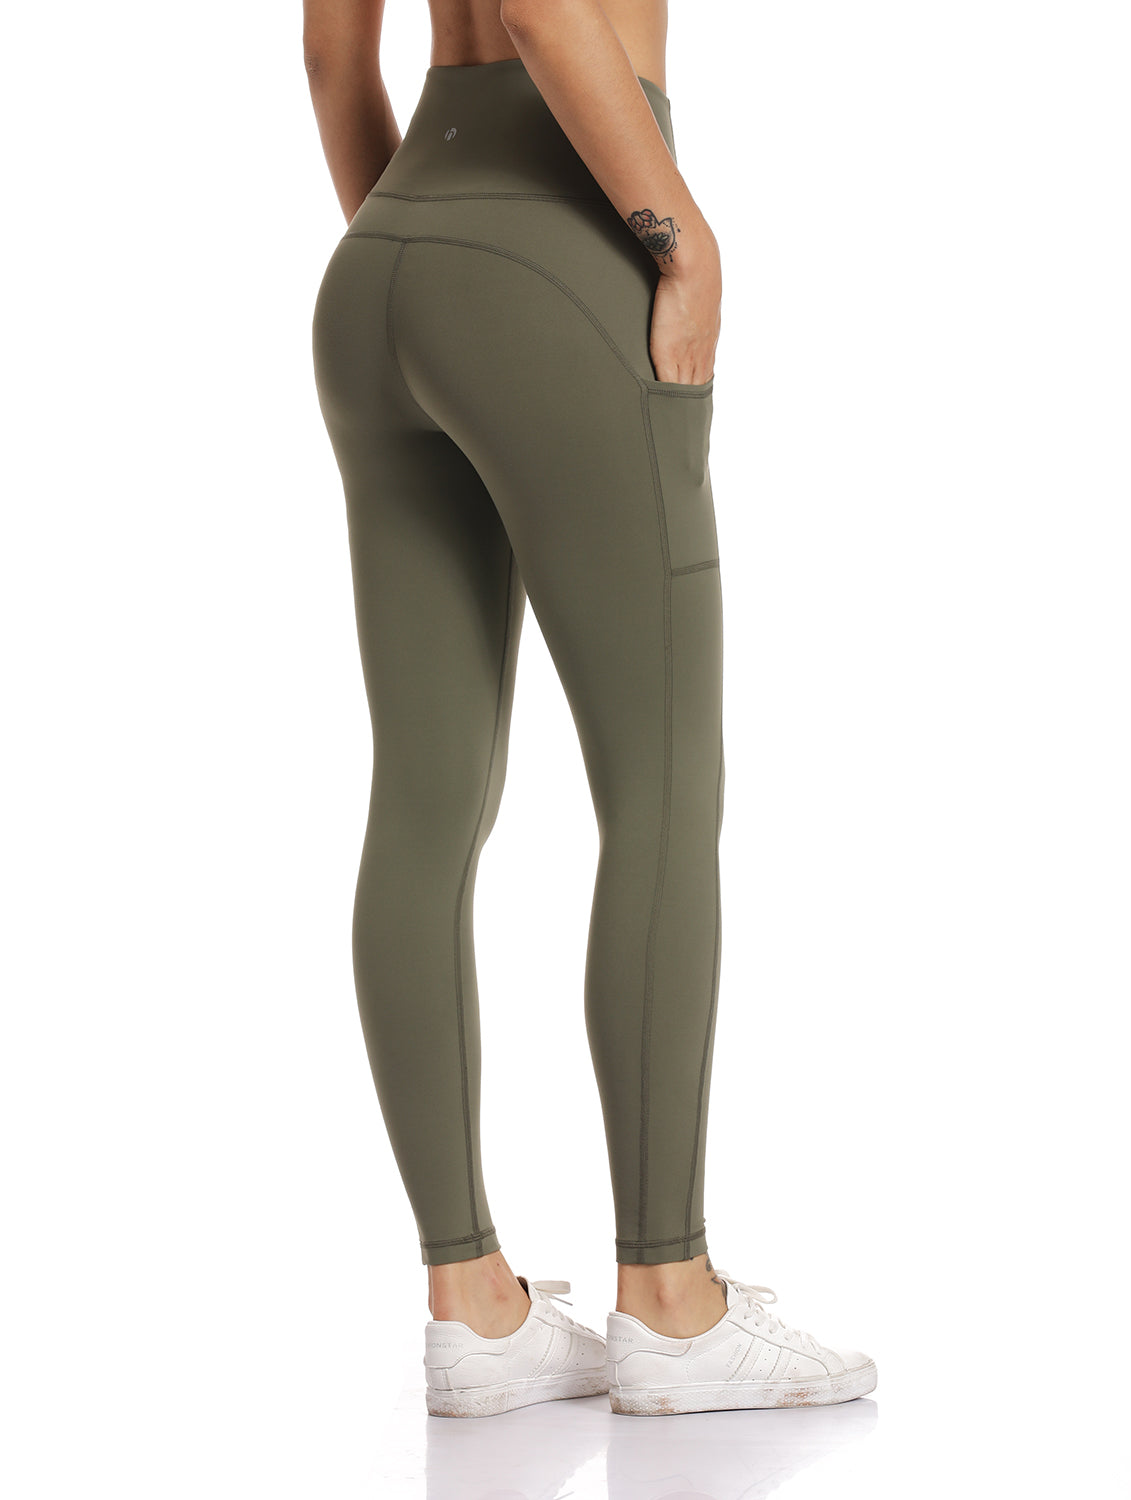 HeyNuts Essential High Waisted Yoga Capris Leggings, Tummy Control Workout  Cropped Pants 19''/21'', Camo Grey_21”, Large